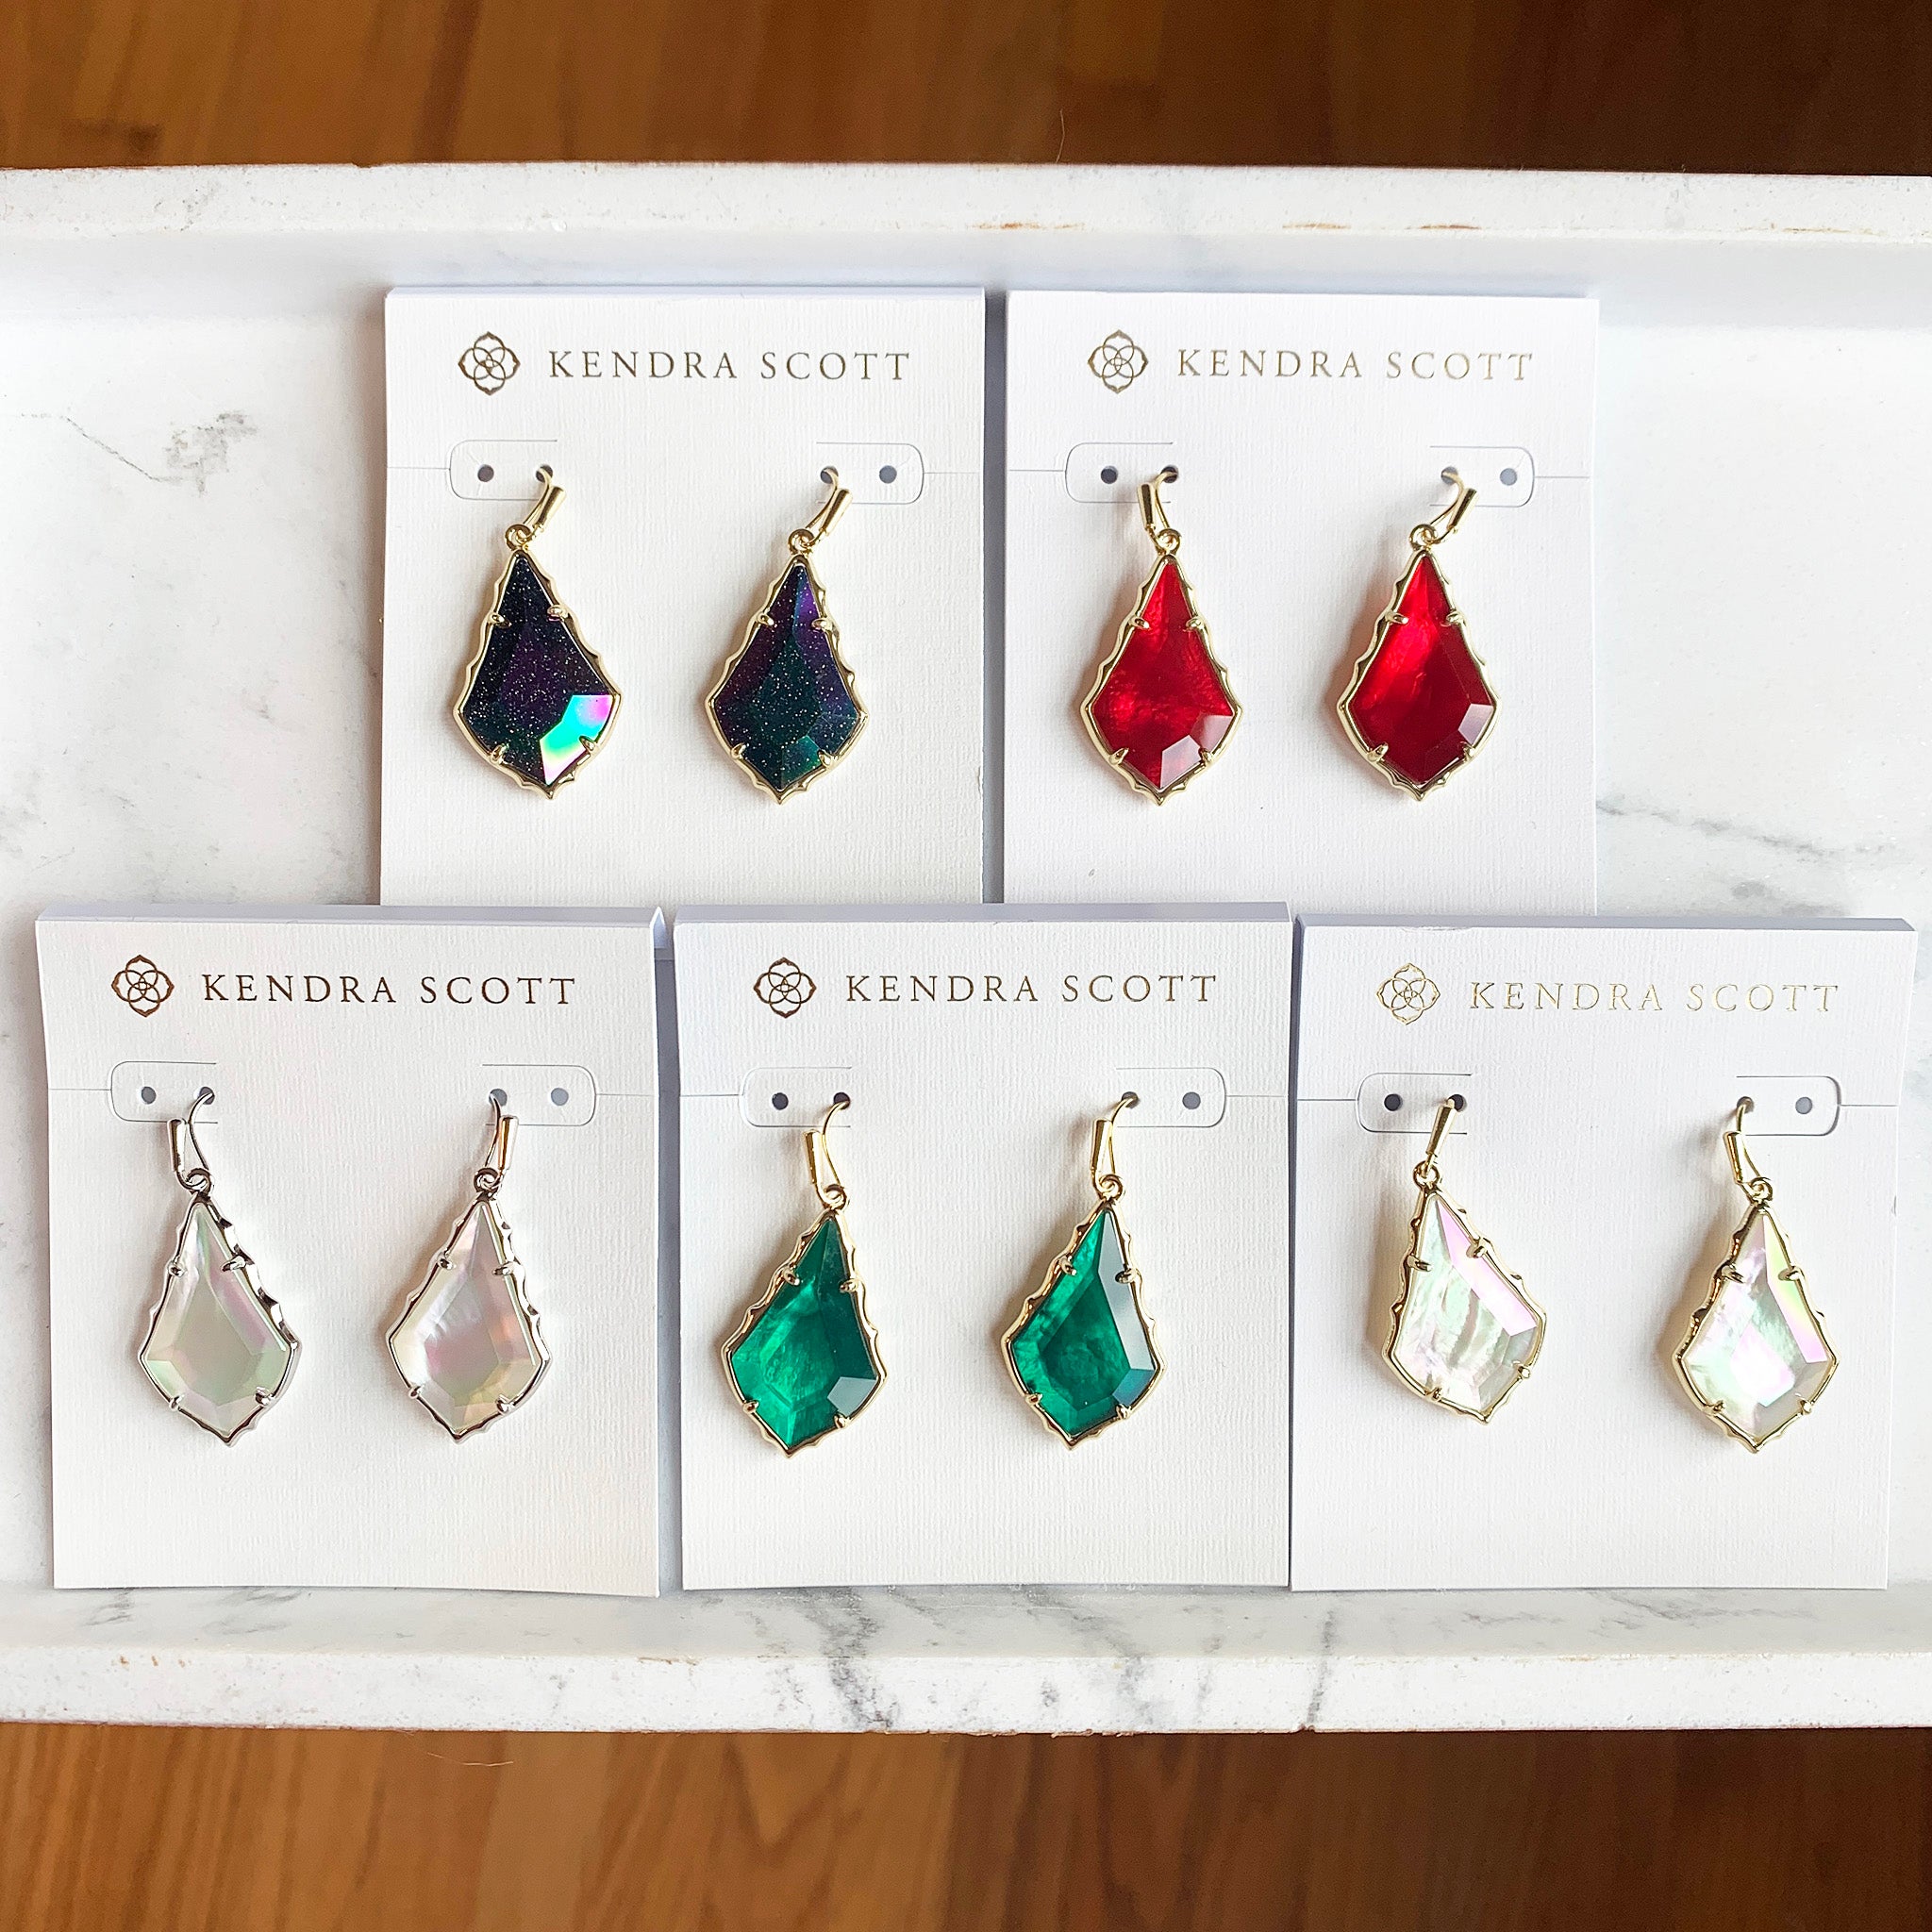 Kendra Scott Small Alex Dangle Earrings in Faceted Ivory Illusion and Rhodium